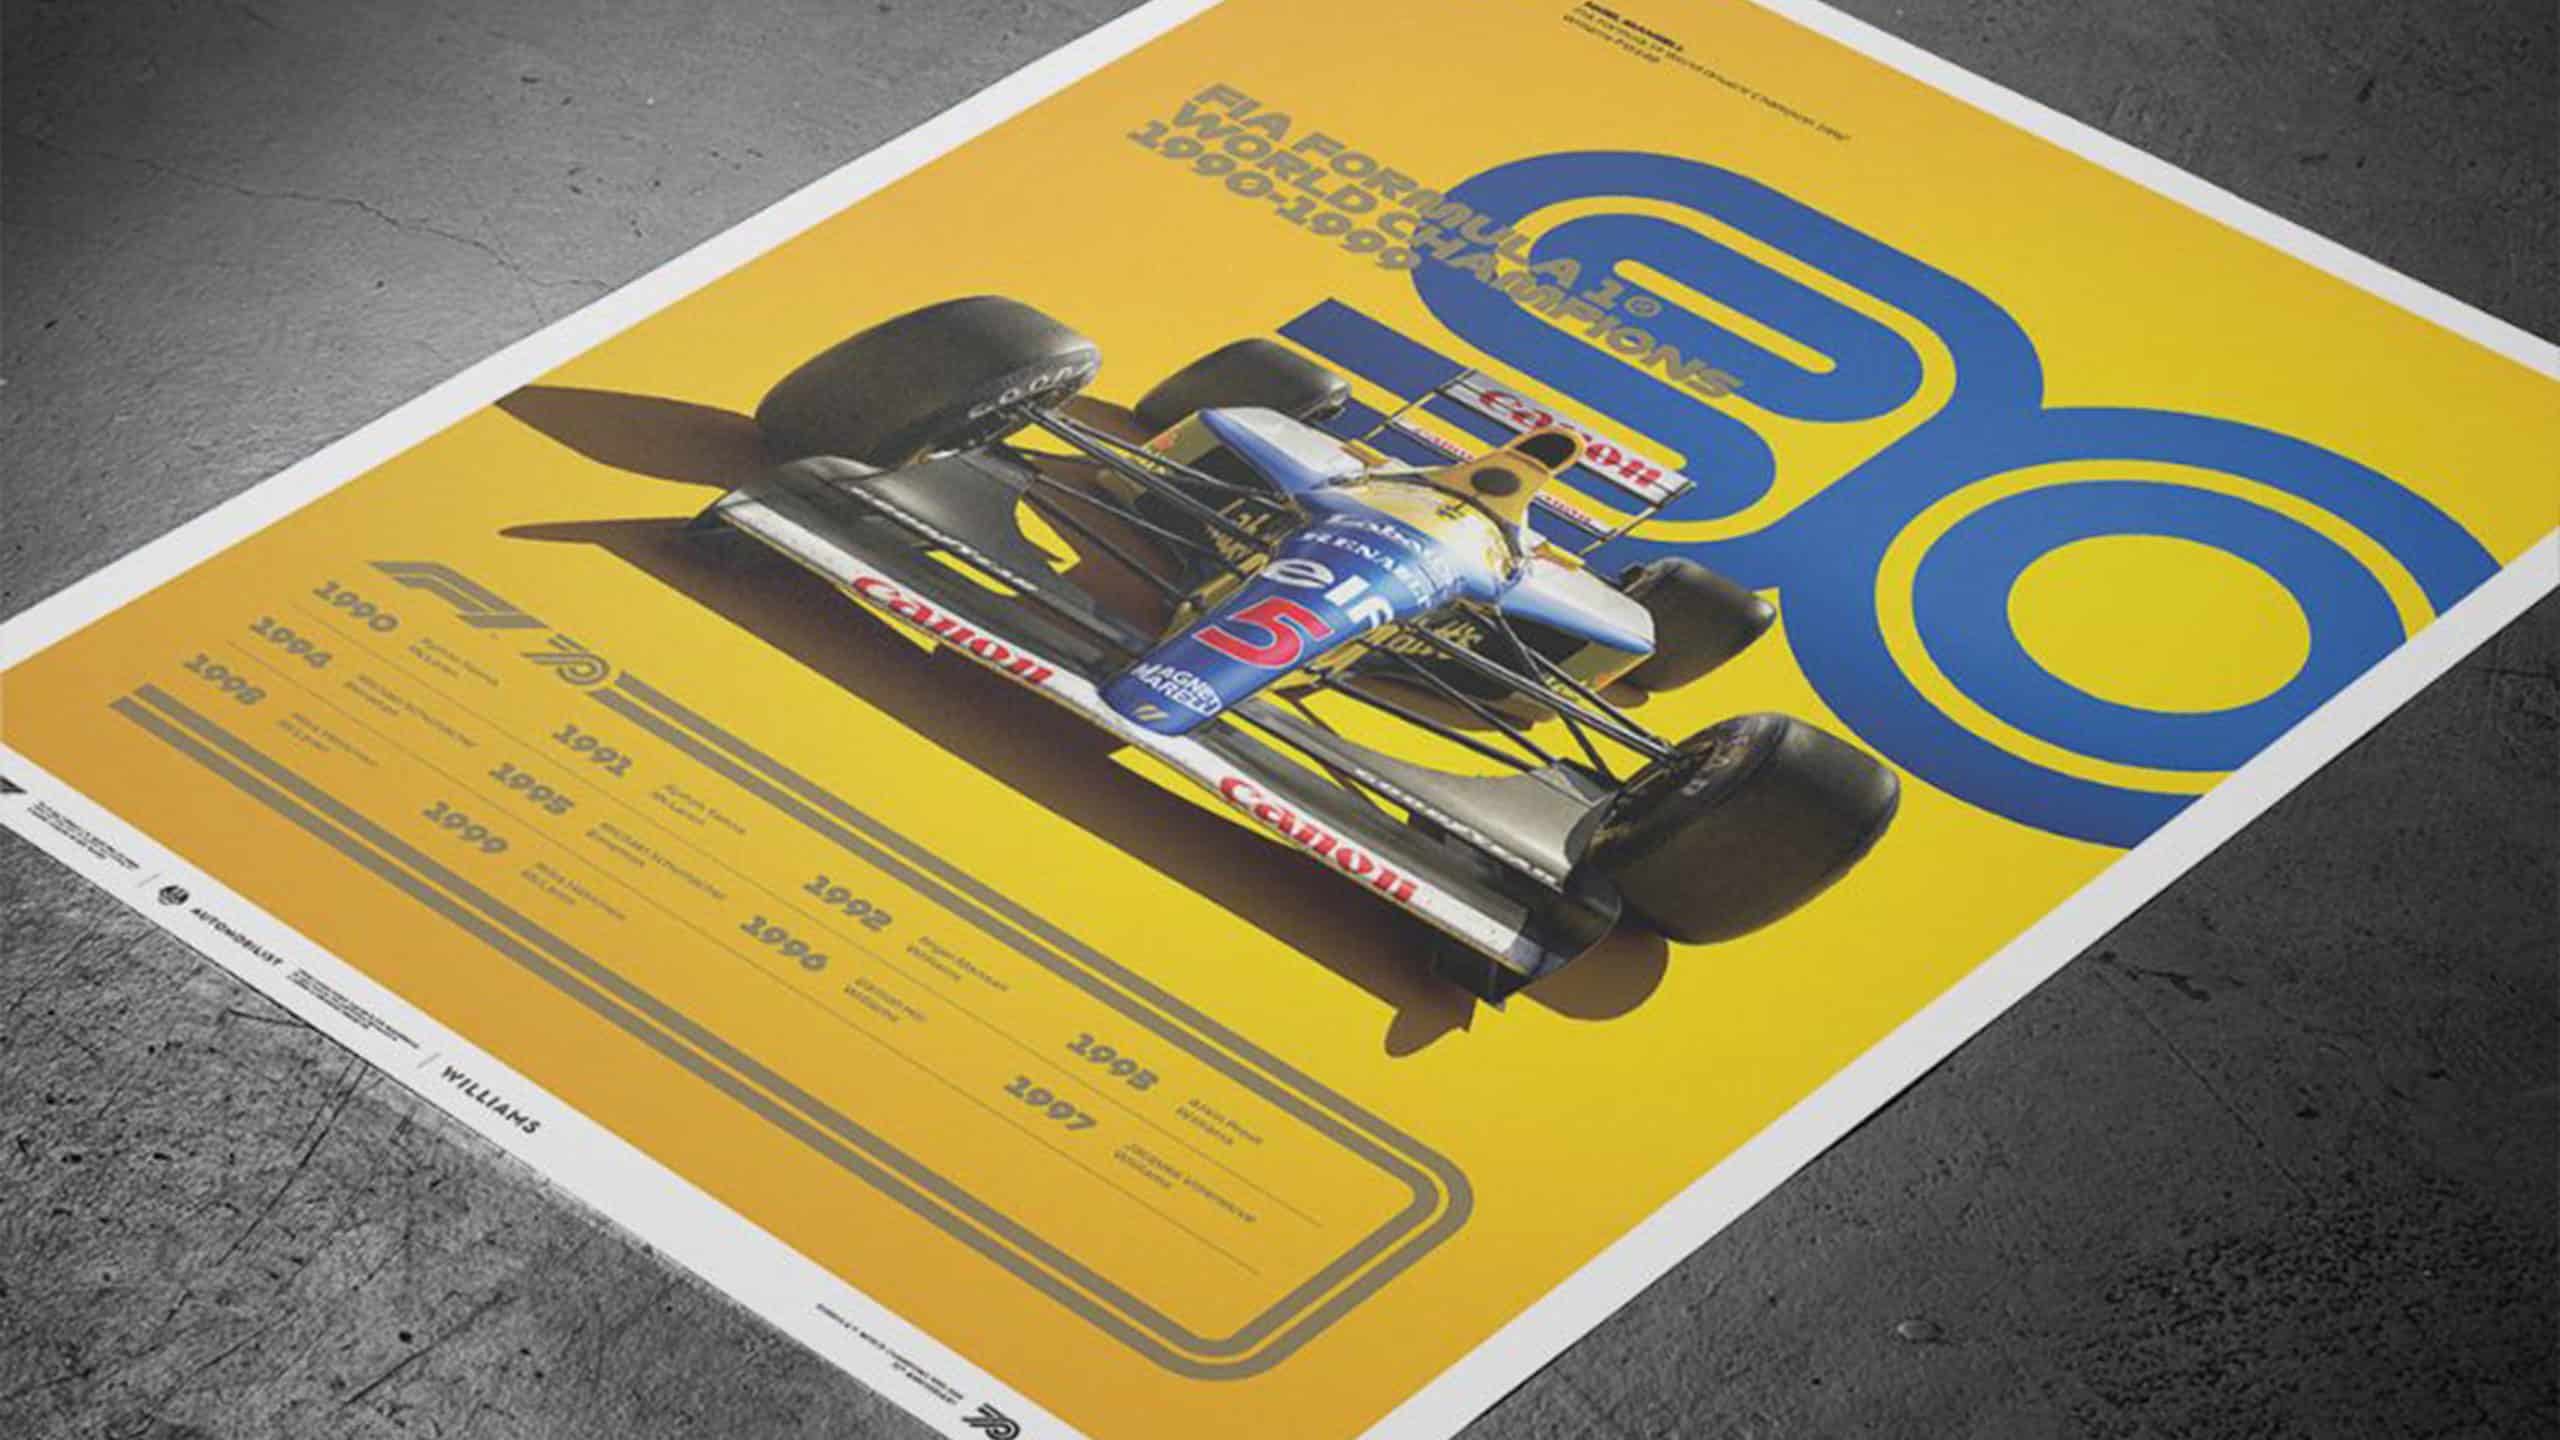 F1 decades 90s poster with 1992 Williams FW14B